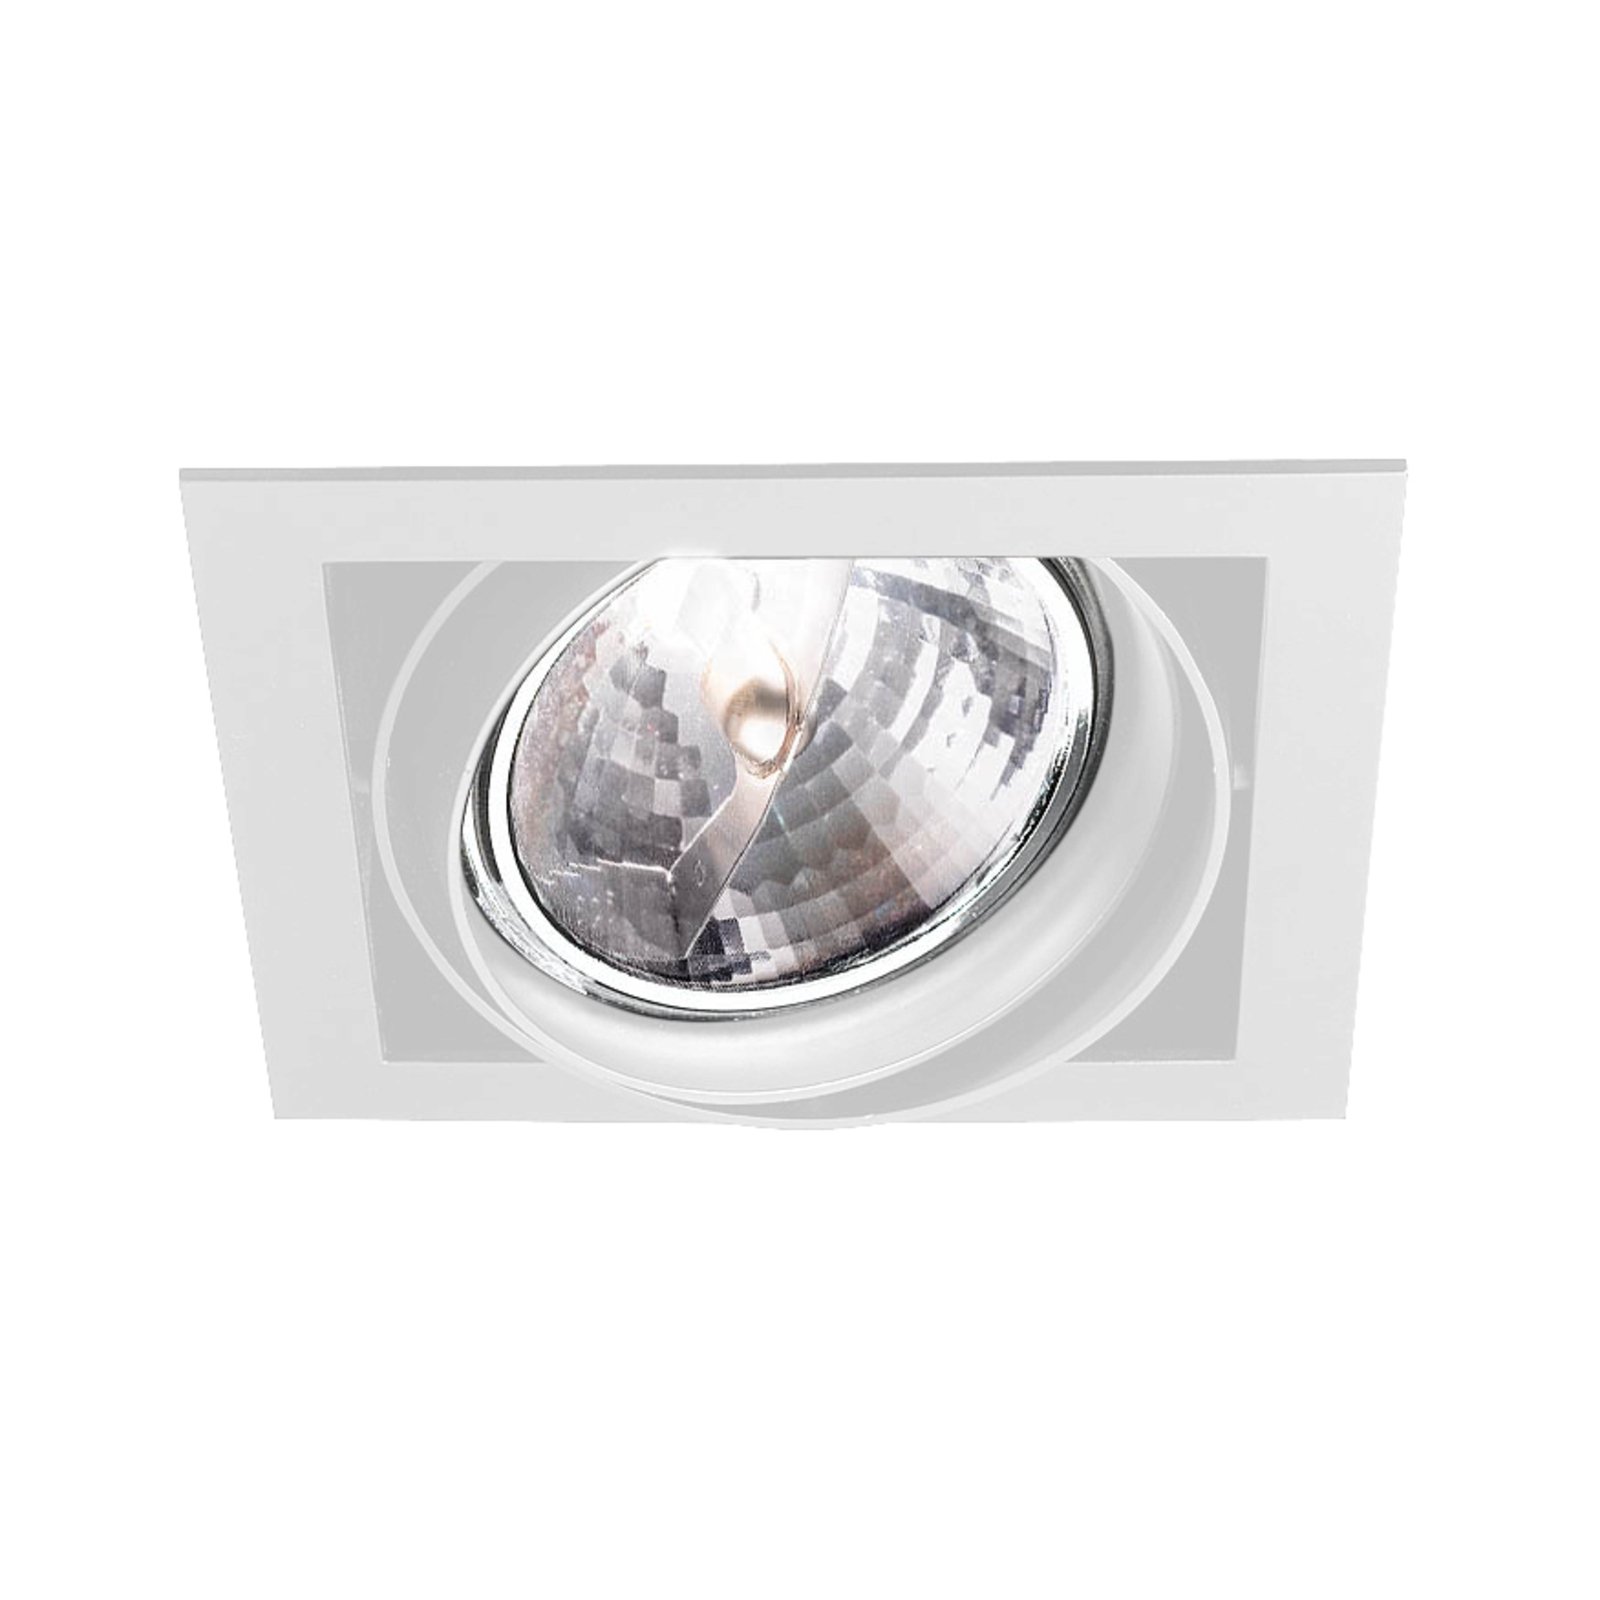 Frame 150 low-voltage downlight, 1-bulb, white